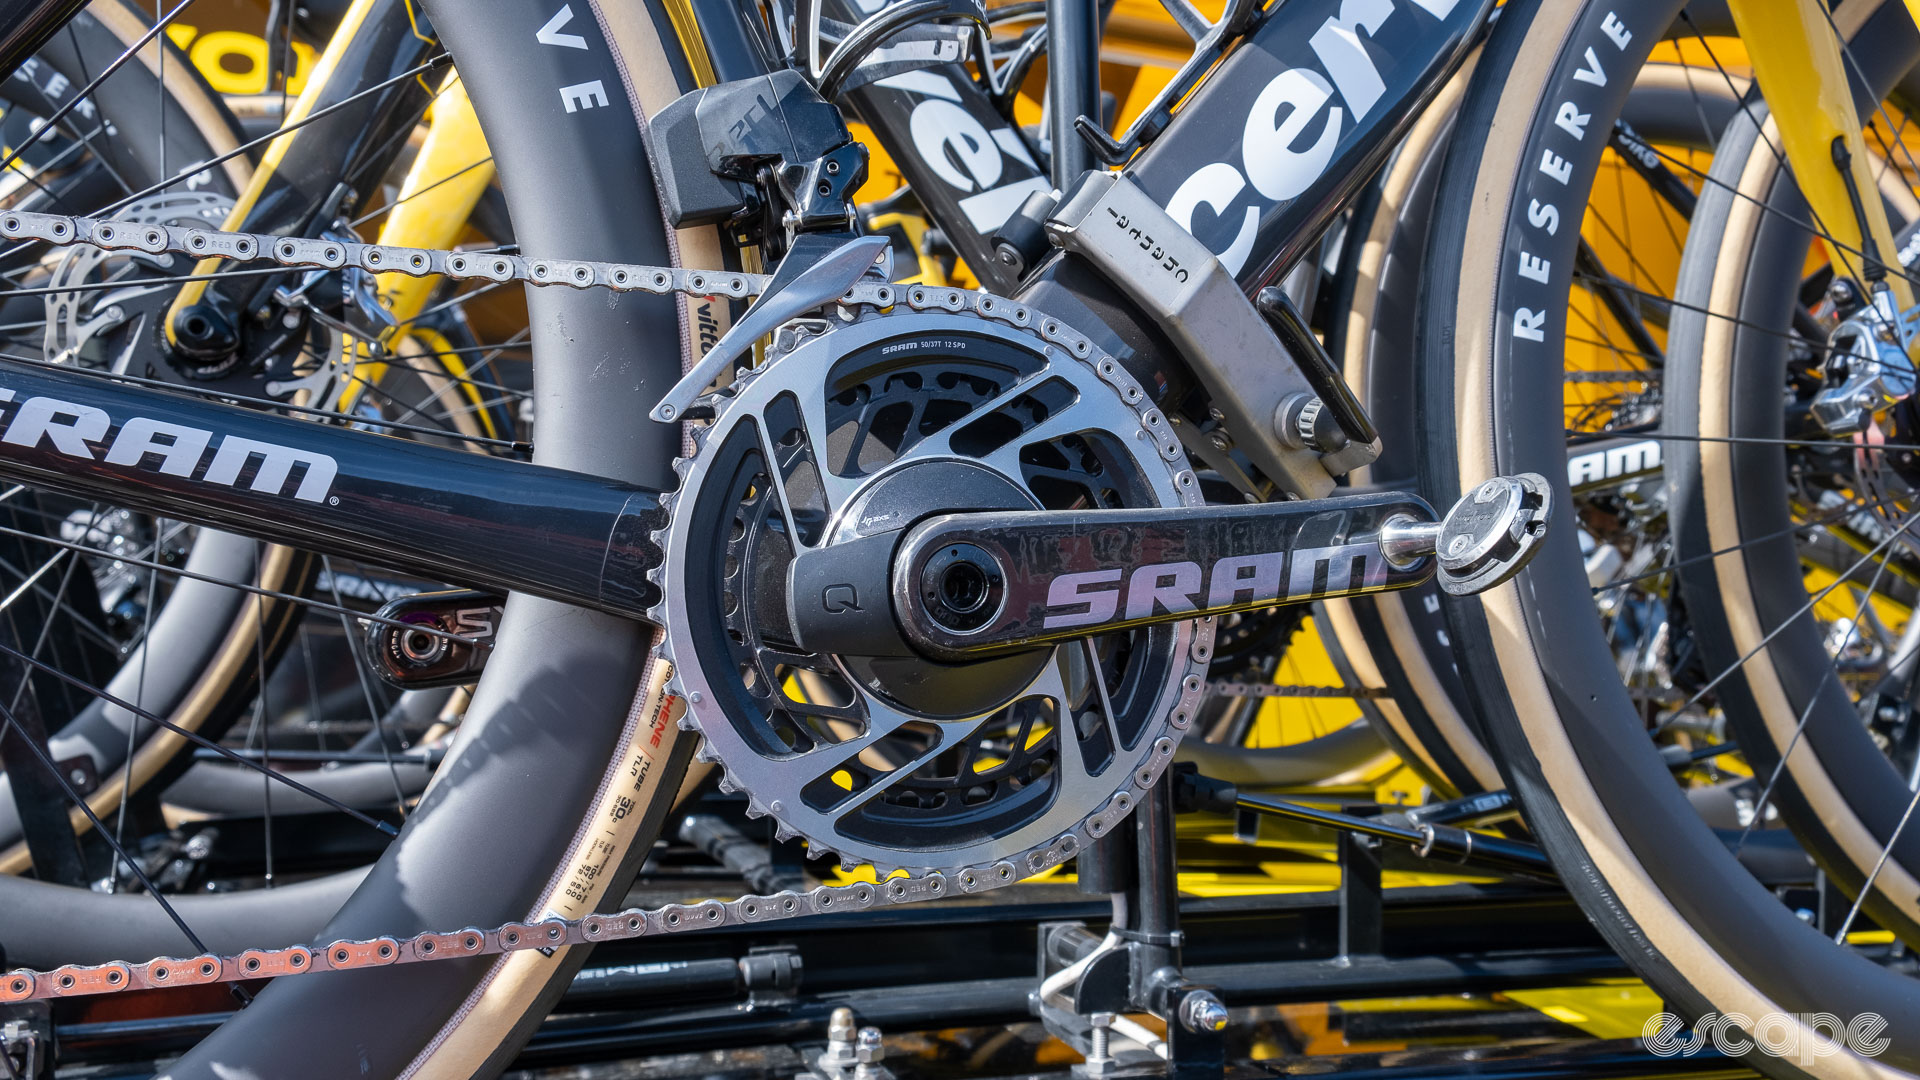 The image shows Marianne Vos' cranks. 